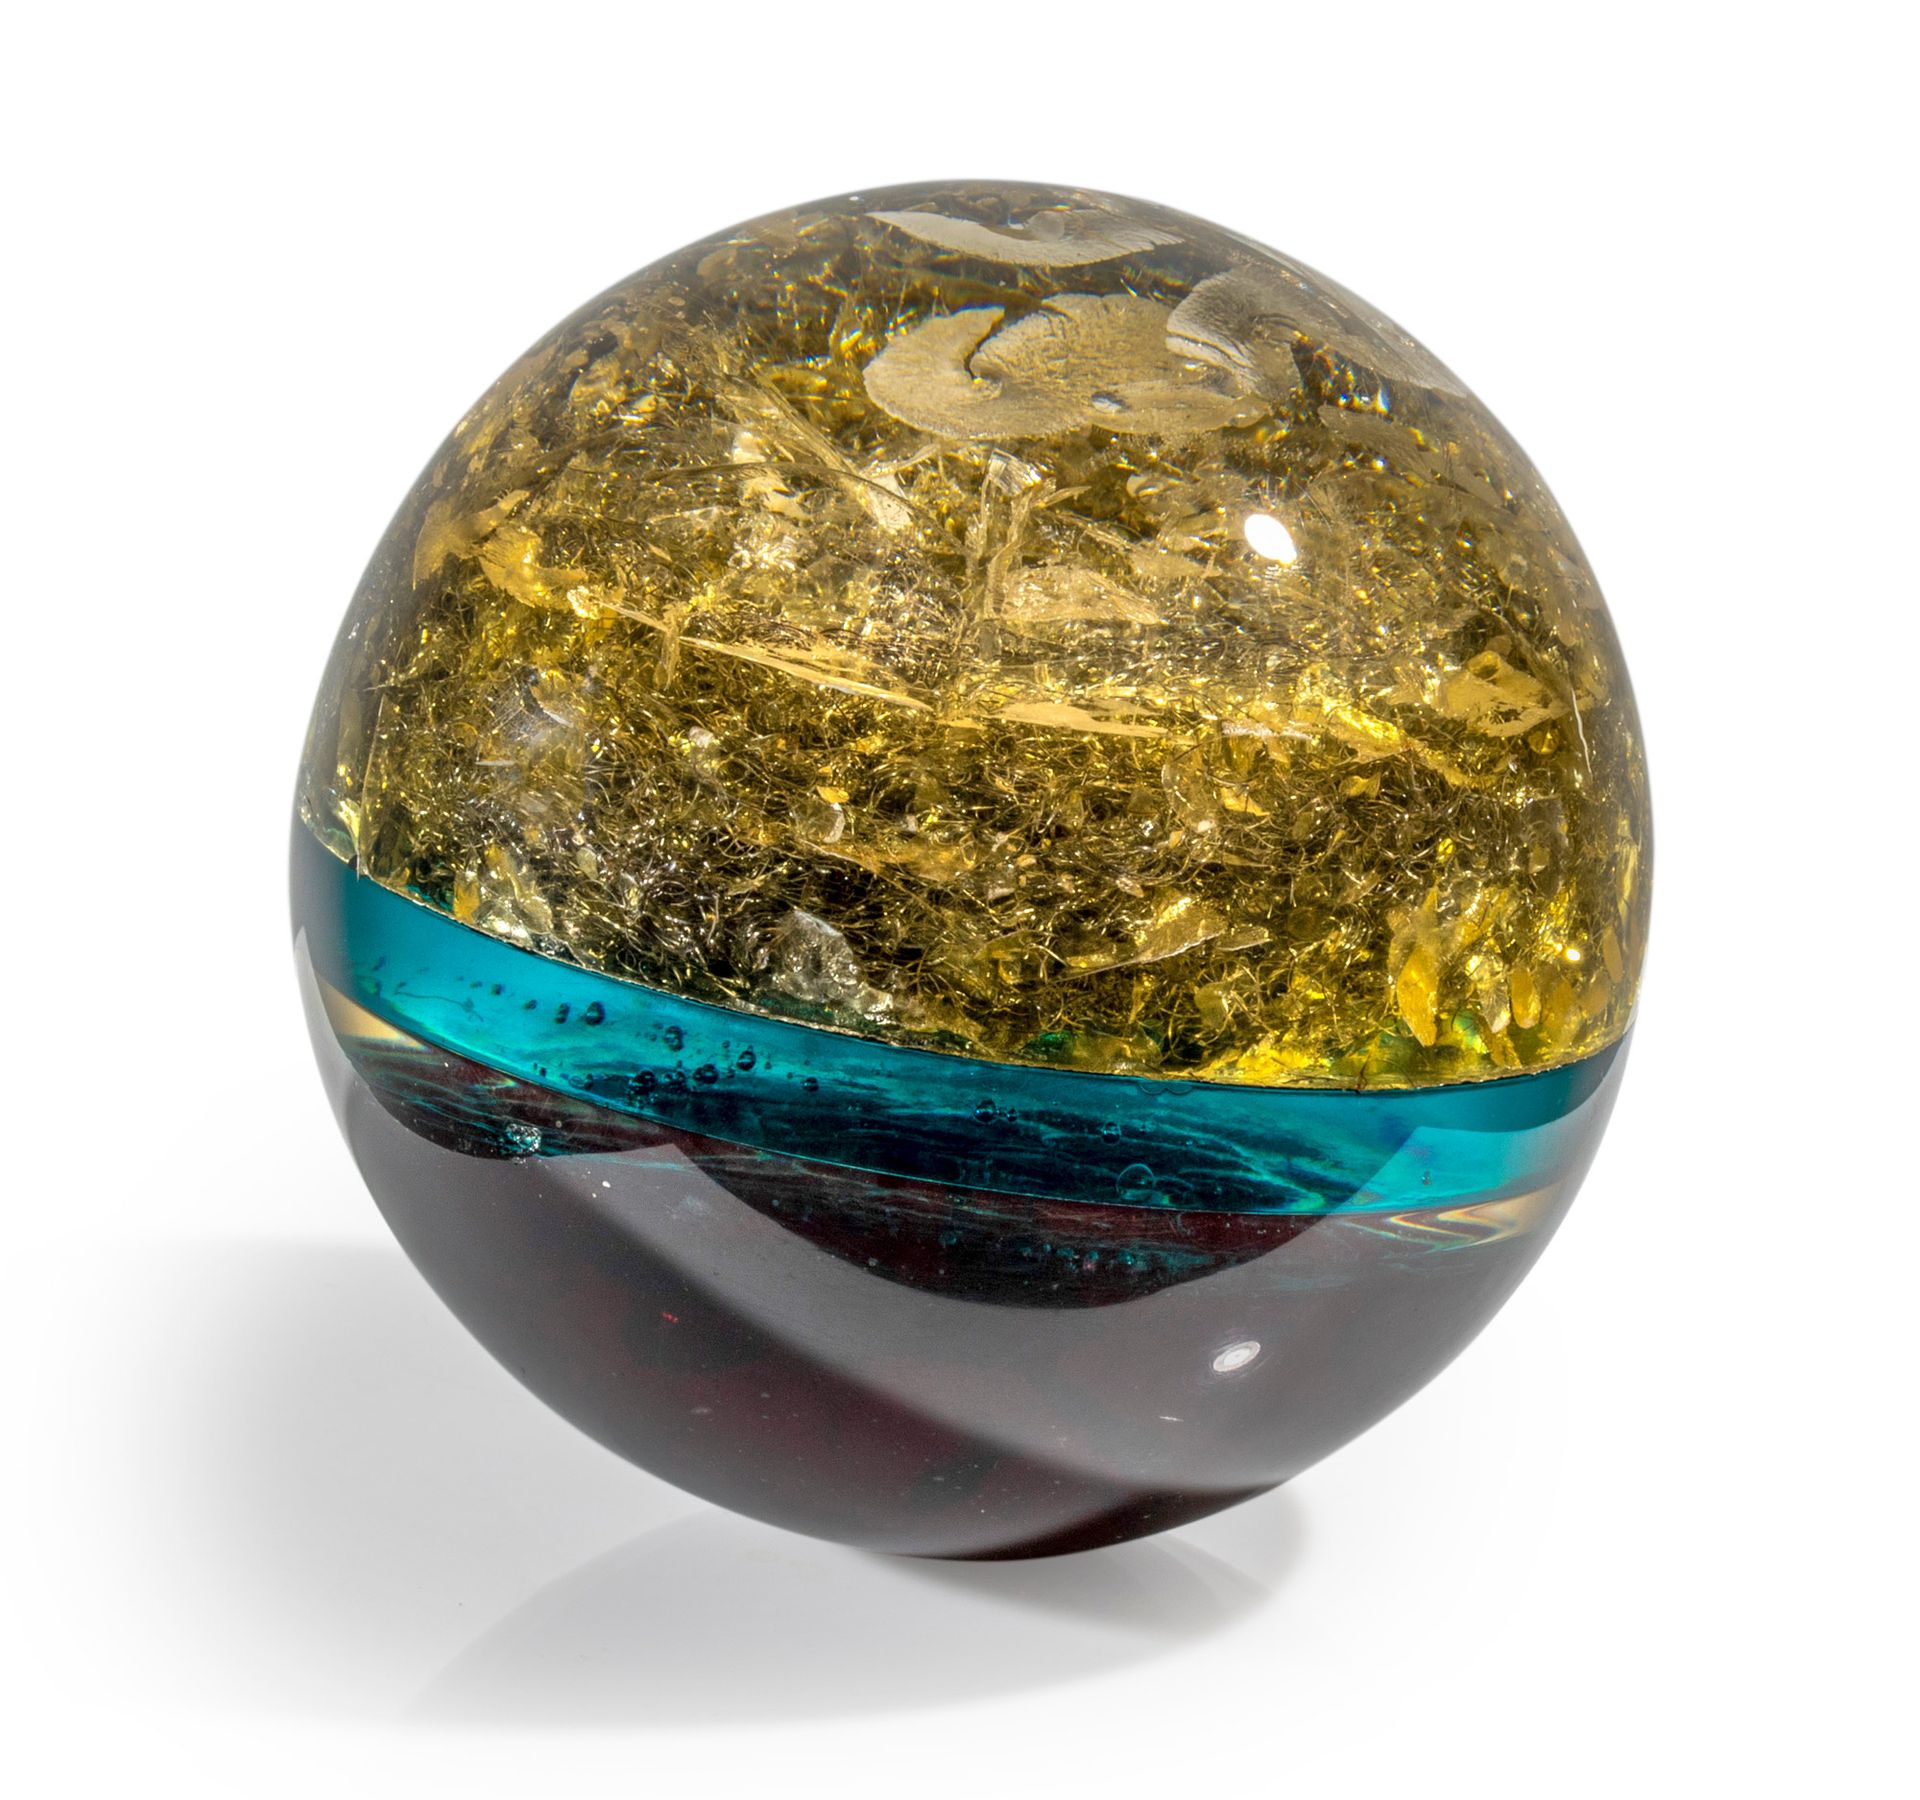 TRAVAIL FRANÇAIS Ball 
Fractal resin and inclusion of various materials
Date of &hellip;